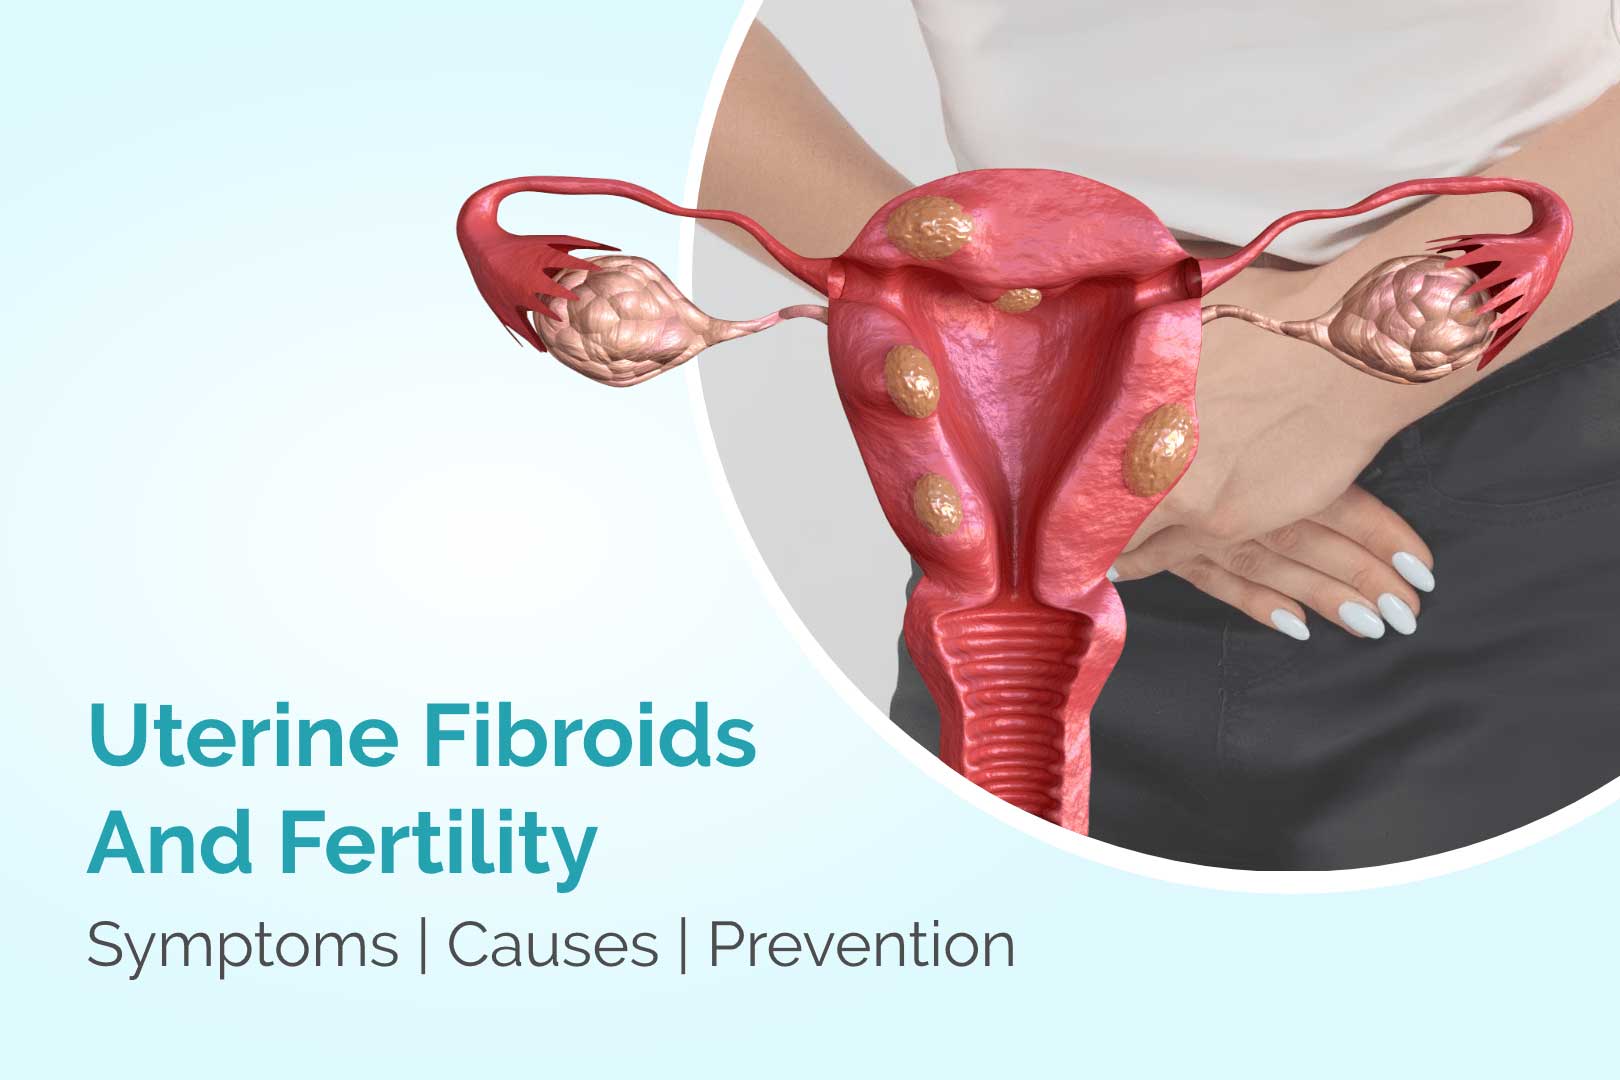 addressing uterine fibroids a significant factor impacting women’s fertility in their 30s